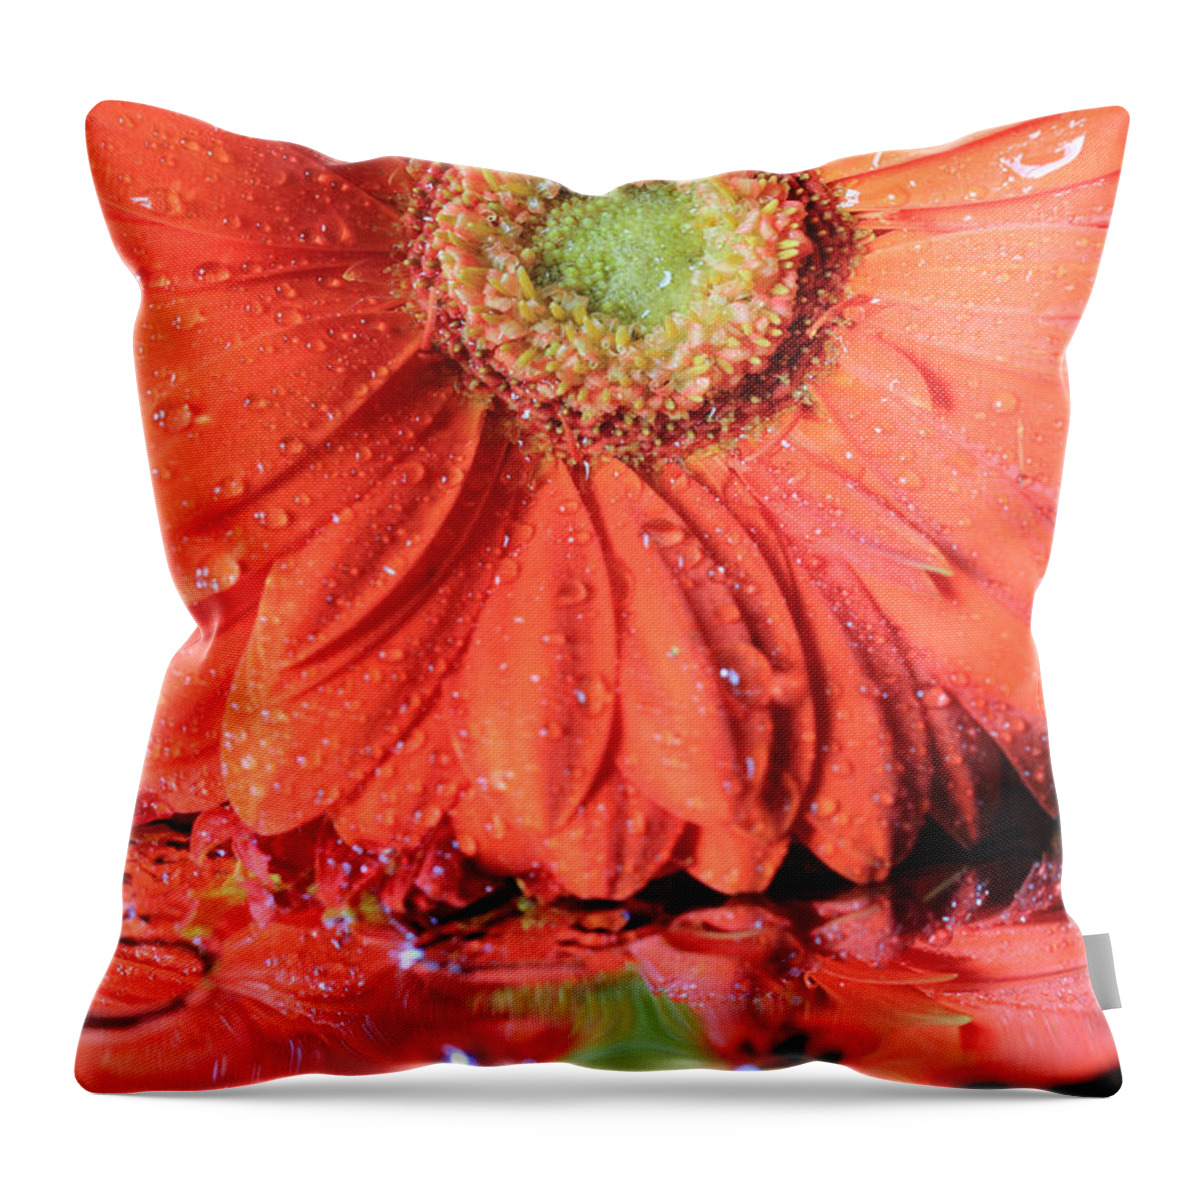 Gerbera Daisy Throw Pillow featuring the photograph Daisy Petals and Reflections by Angela Murdock